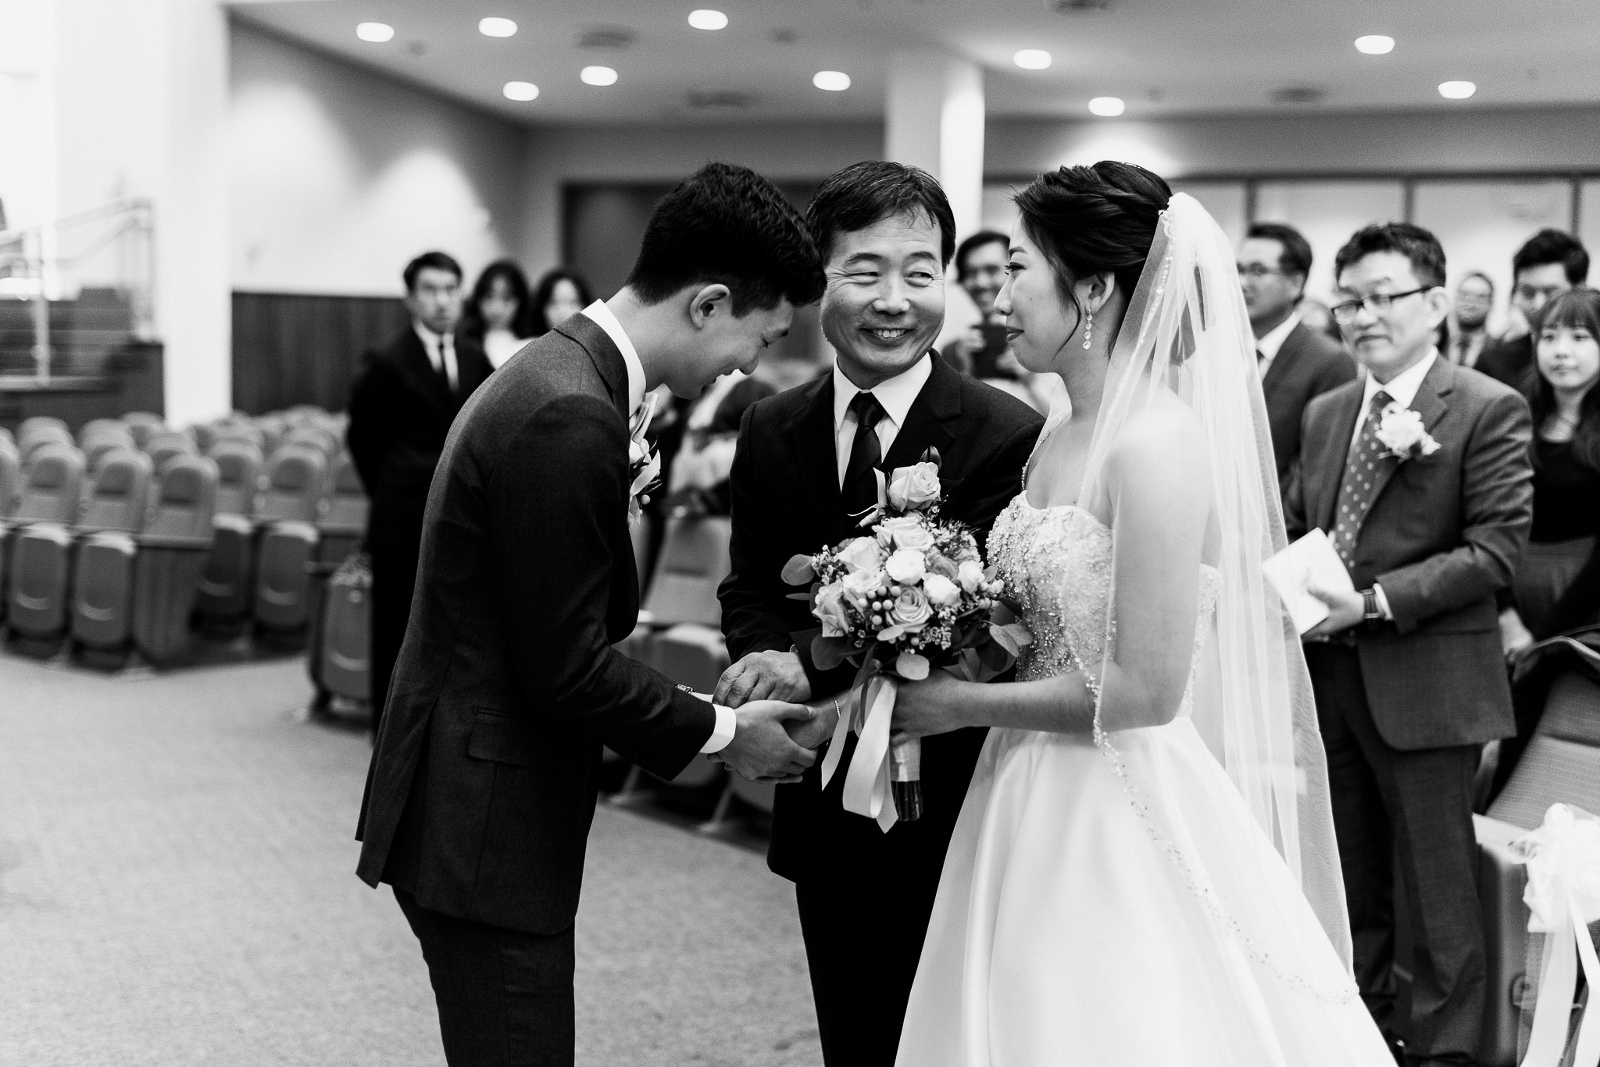 Bride's korean fother looking lovingly at her as he gives her hand away to the groom